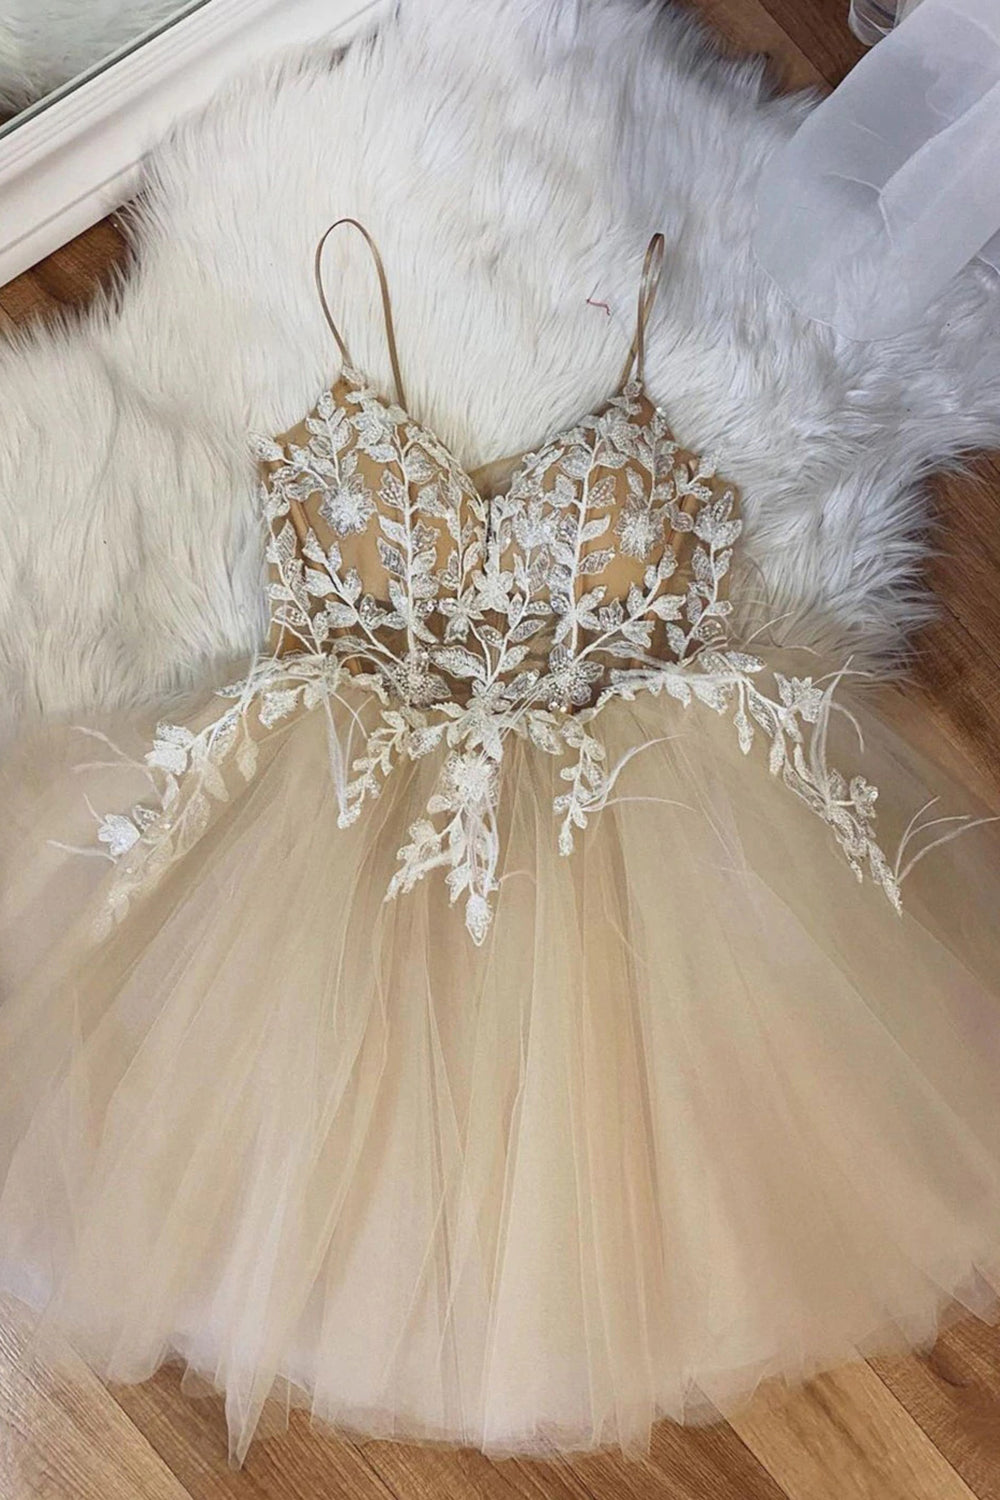 Beige Spaghetti Straps Corset Homecoming Dress With Appliques Gowns, Homecoming Dresses For Girls